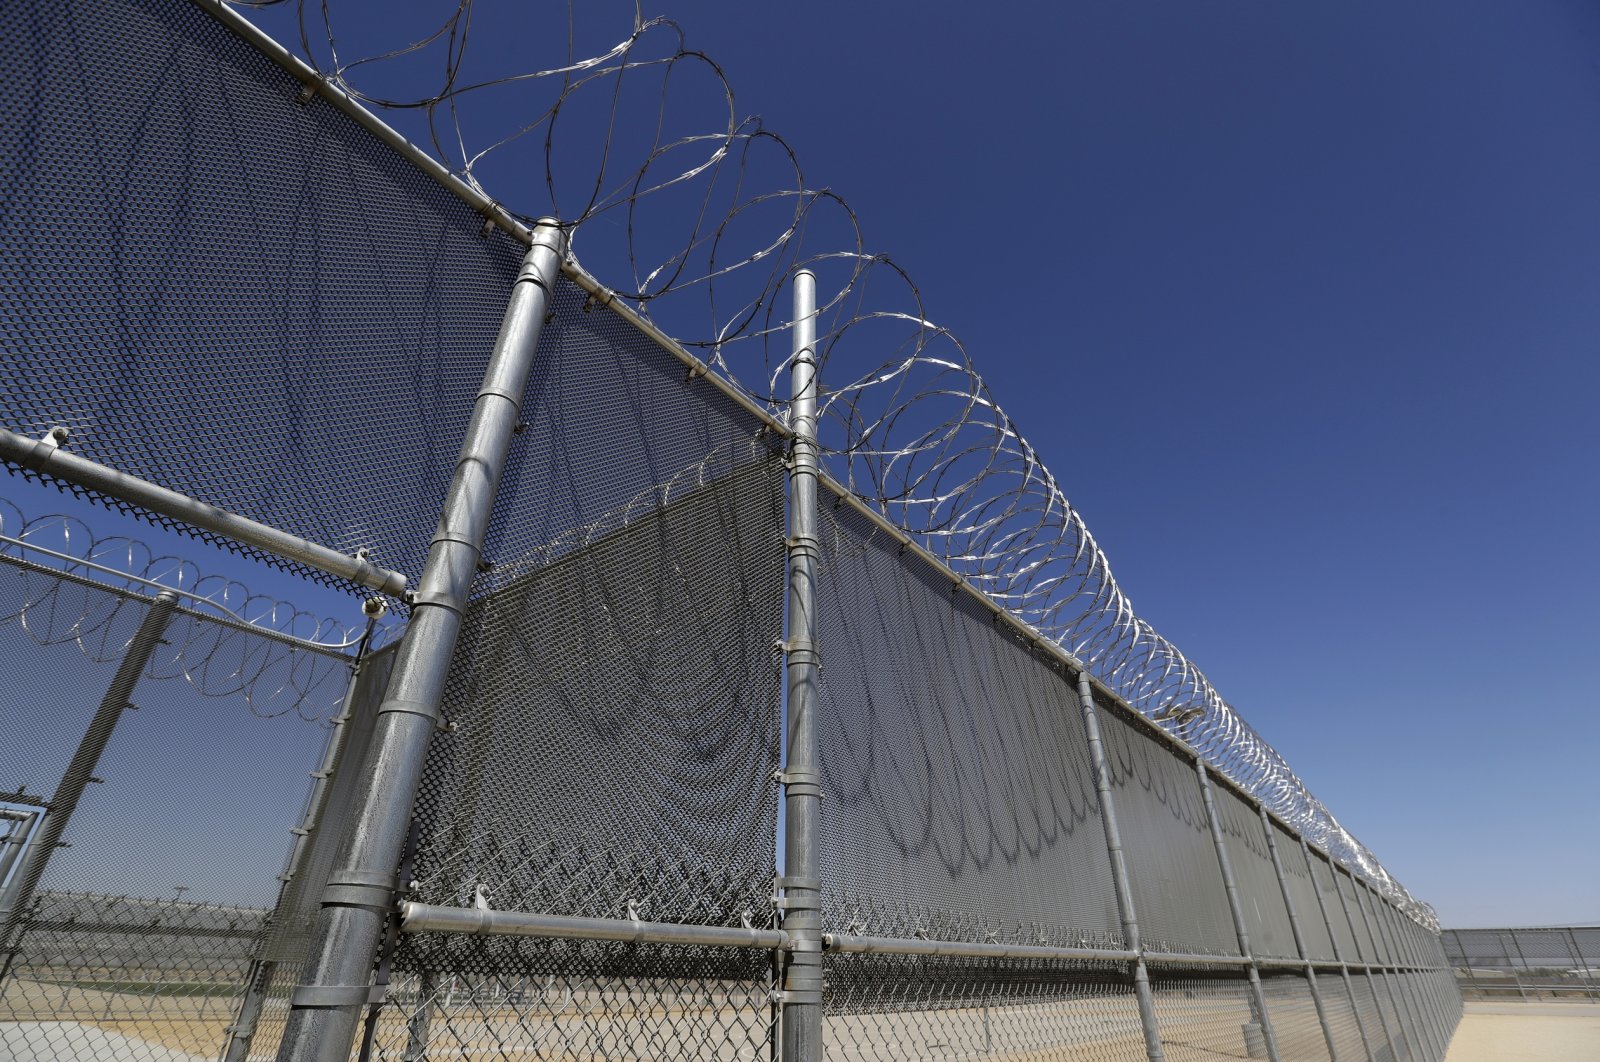 Shown is the Adelanto U.S. Immigration and Enforcement Processing Center operated by GEO Group, Inc. (GEO) a Florida-based company specializing in privatized corrections in Adelanto, California, U.S., Aug. 28, 2019. (AP File Photo)